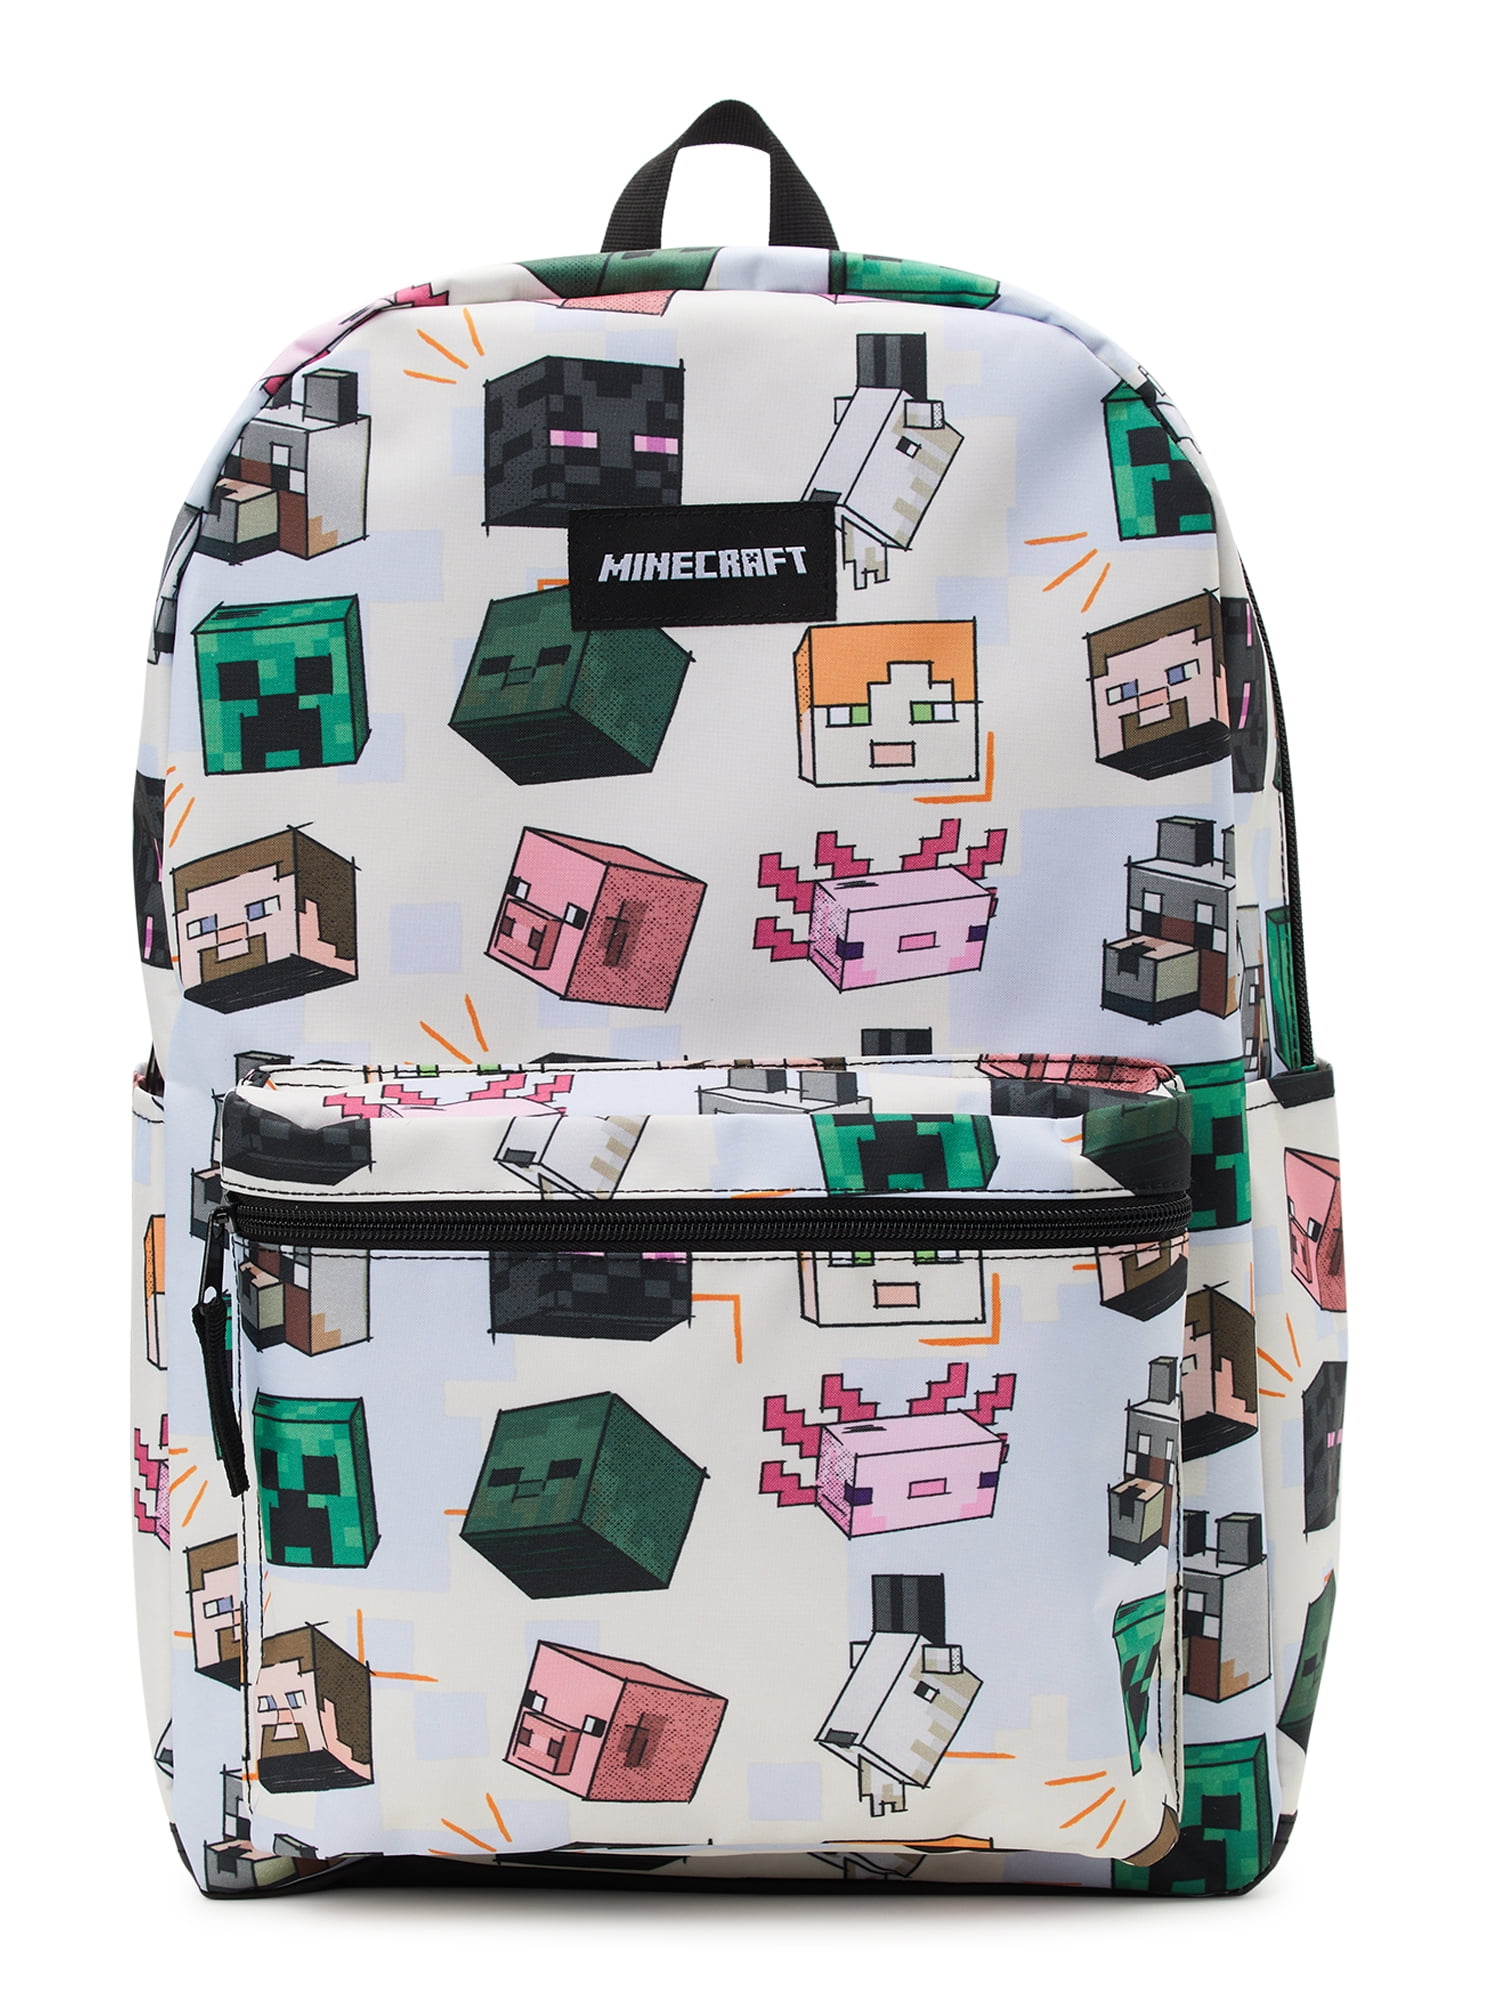 DIY Panda and Minecraft Backpack and a Tablet Bag